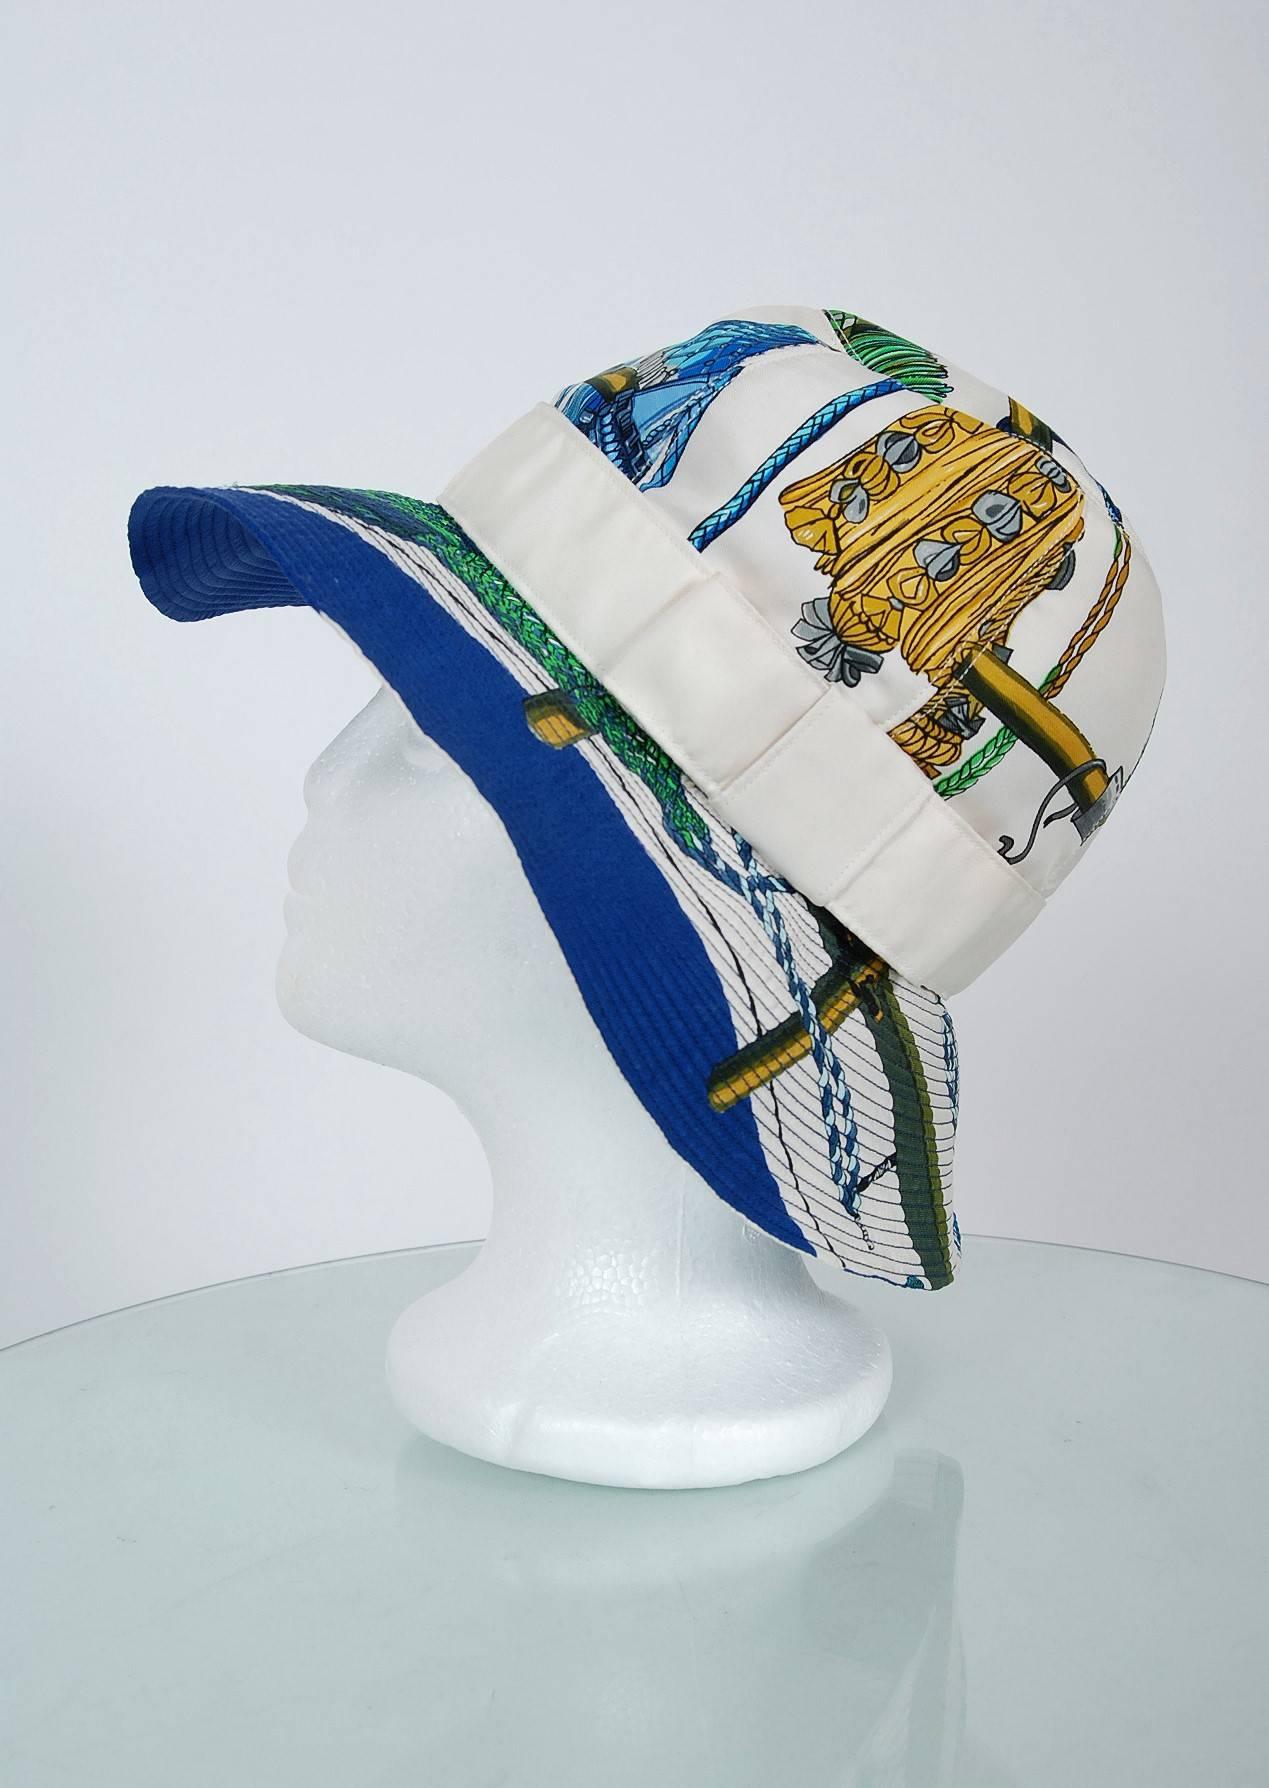 Hermès Paris has whispered the ultimate in luxury since 1837. This beautiful resort bucket hat, dating back to the mid 1960's, is a perfect example of this brand's elegant allure. The fabric used for this hat is breathtaking; colorful nautical